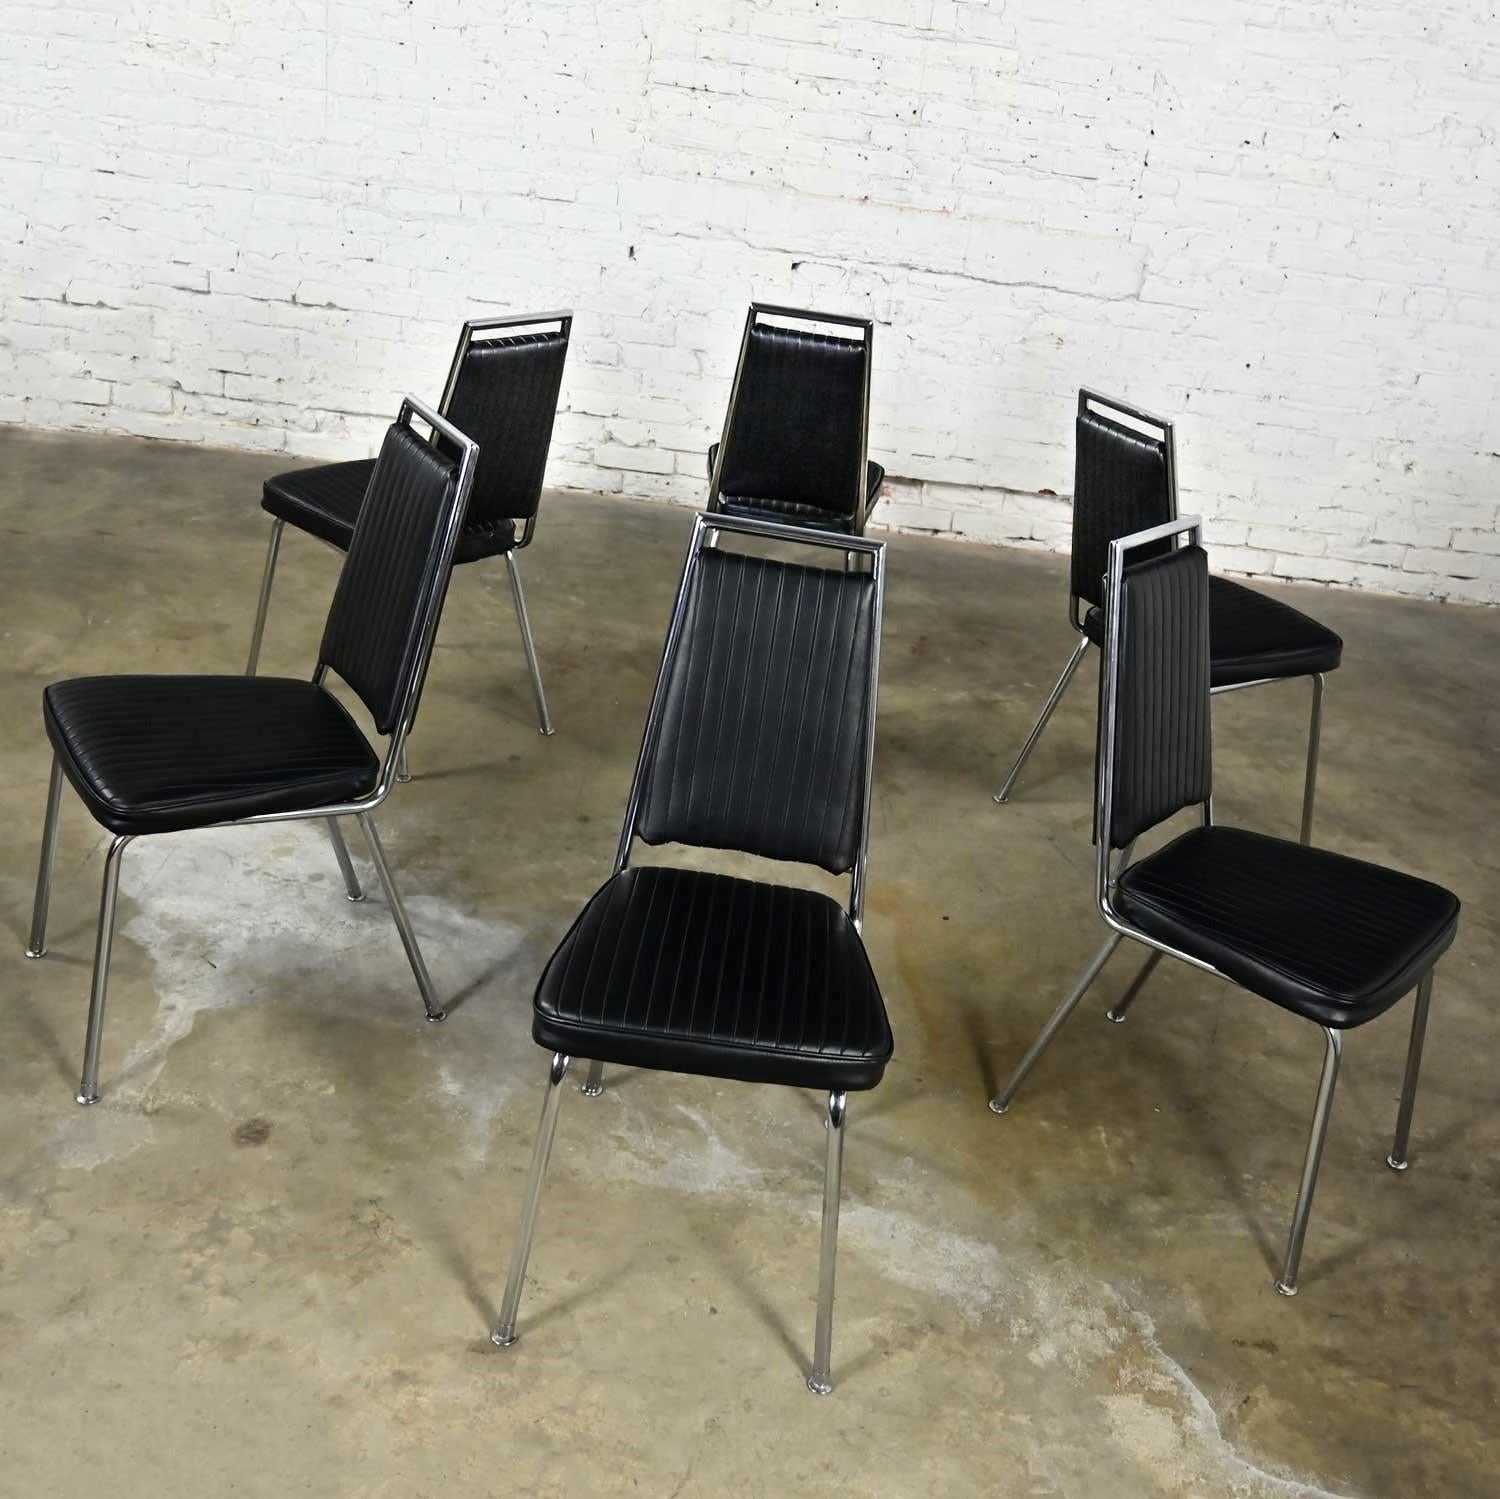 Fabulous MCM (a.k.a.) mid-century modern Chromcraft ribbed or channeled black vinyl faux leather & chrome dining chairs set of 6. Beautiful condition, keeping in mind that this is vintage and not new so will have signs of use and wear. These chairs